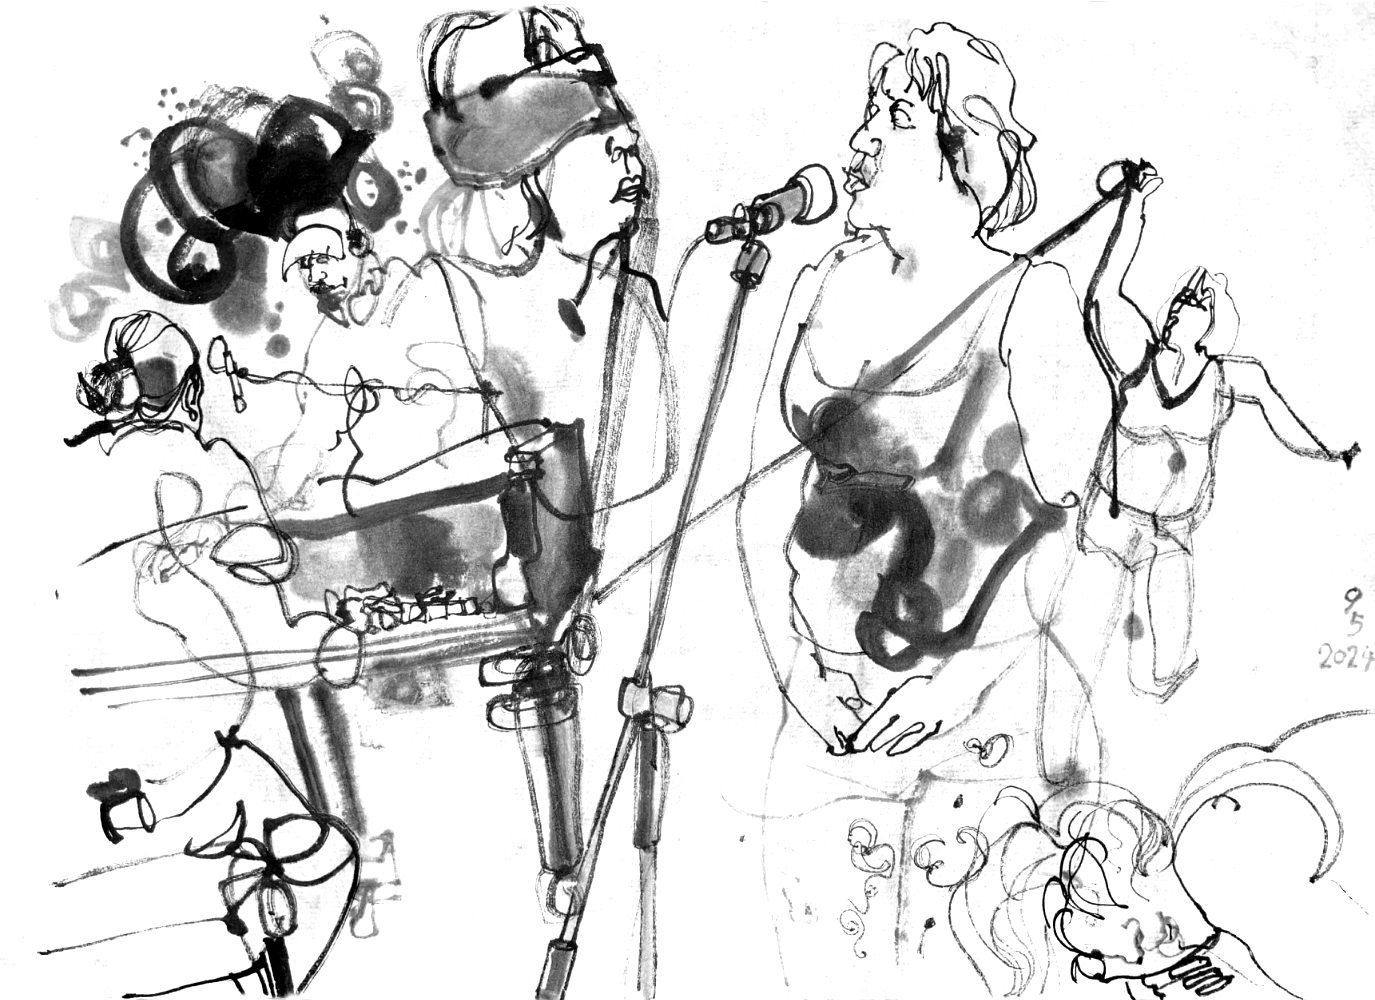 Ink drawing of two performers, a man playing piano (on the keyboard and inside and a woman, singing, performing with gaffa tape and manipulating a toy keyboard with her head.